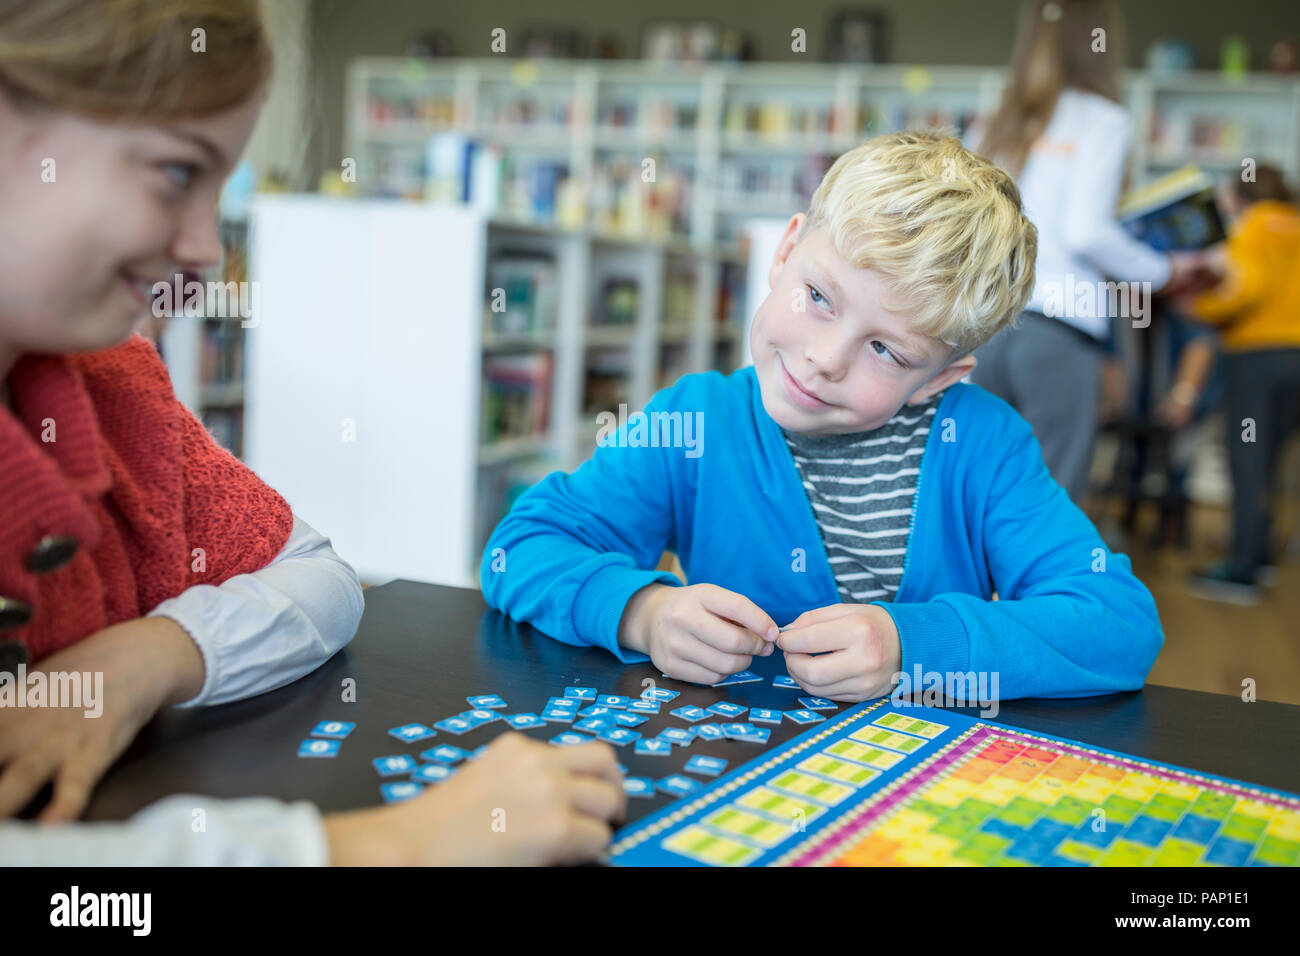 Pupils playing a board game in school library smiling at each other Stock Photo